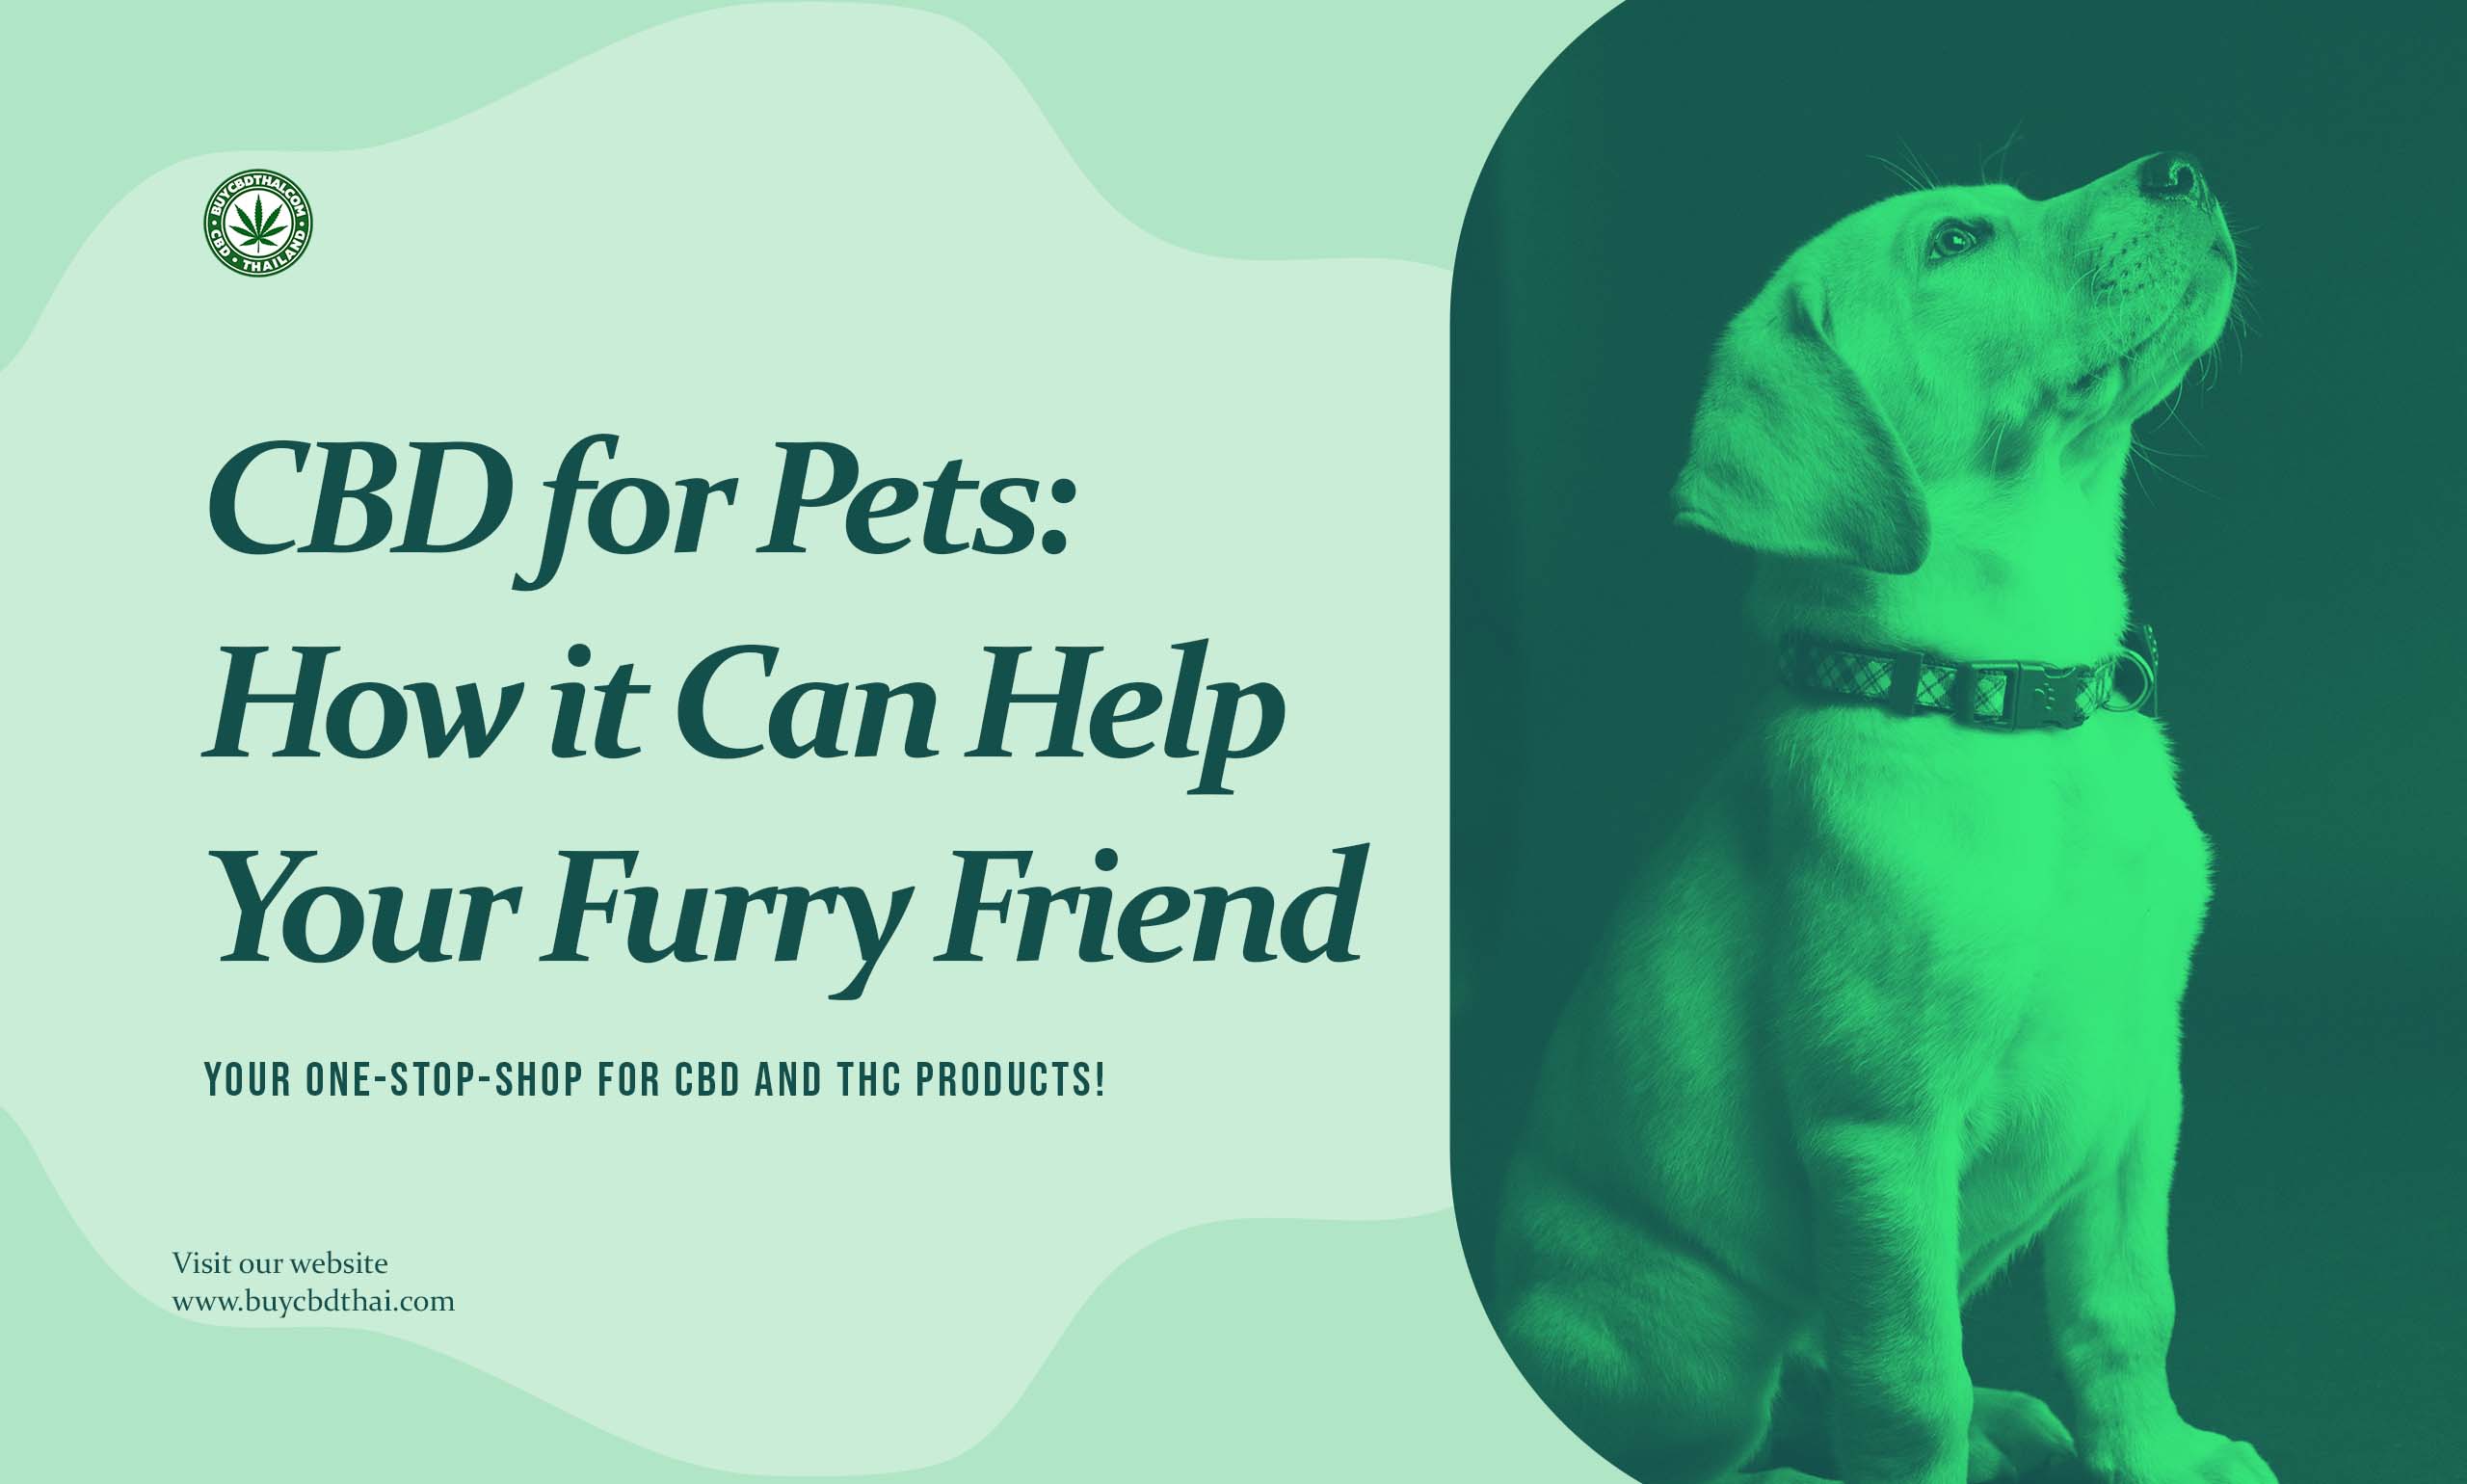 CBD for Pets: How it Can Help Your Furry Friend